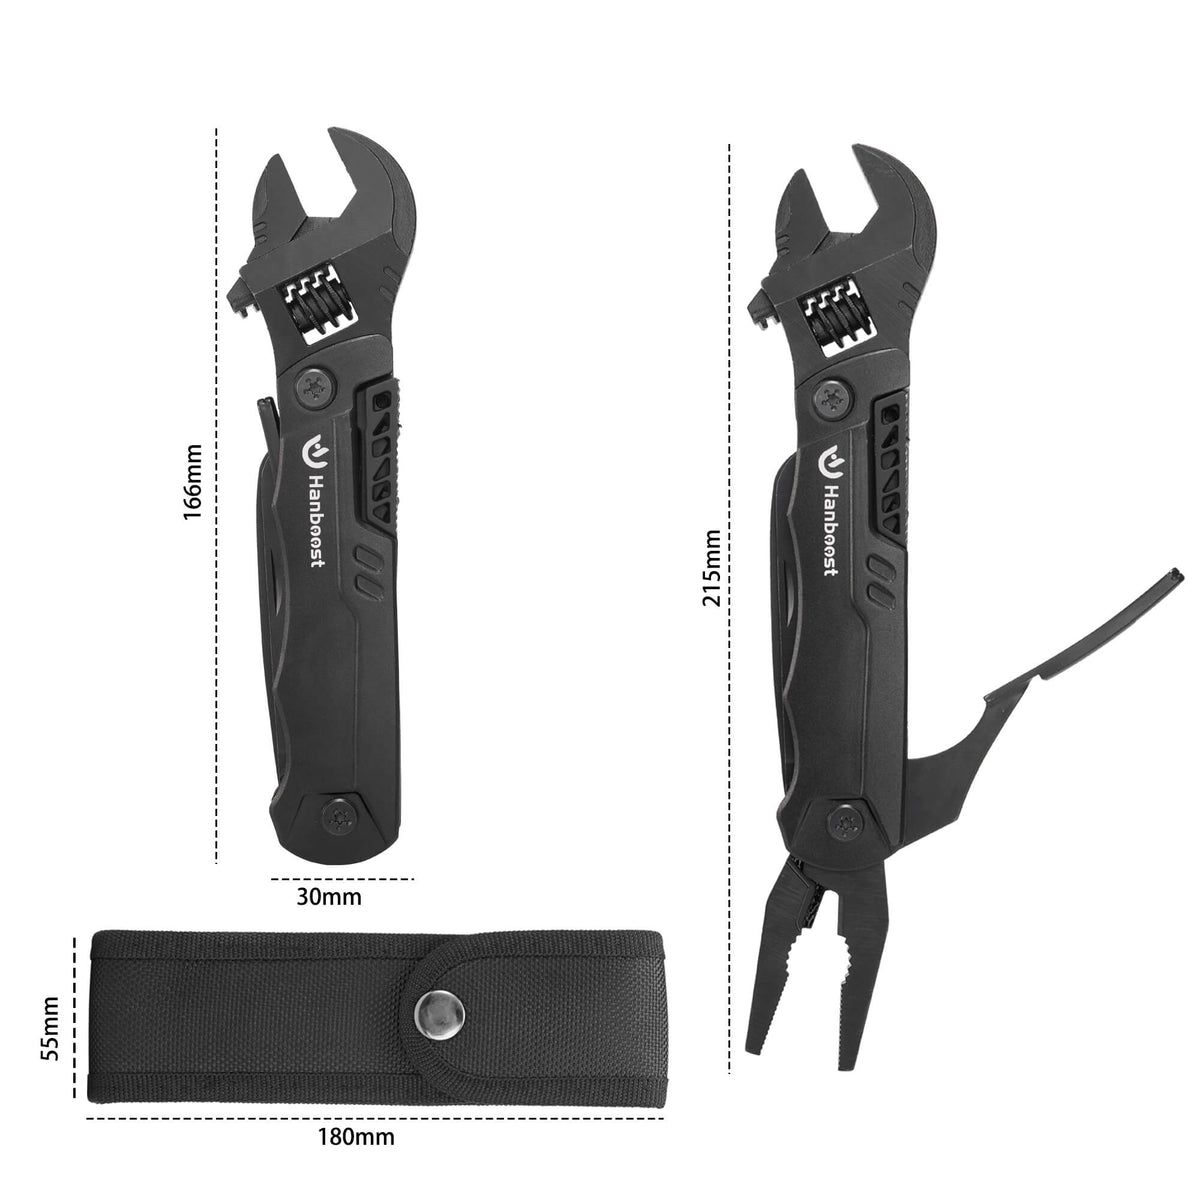 Hanboost M2 Multi-functional Adjustable Wrench 19 In 1